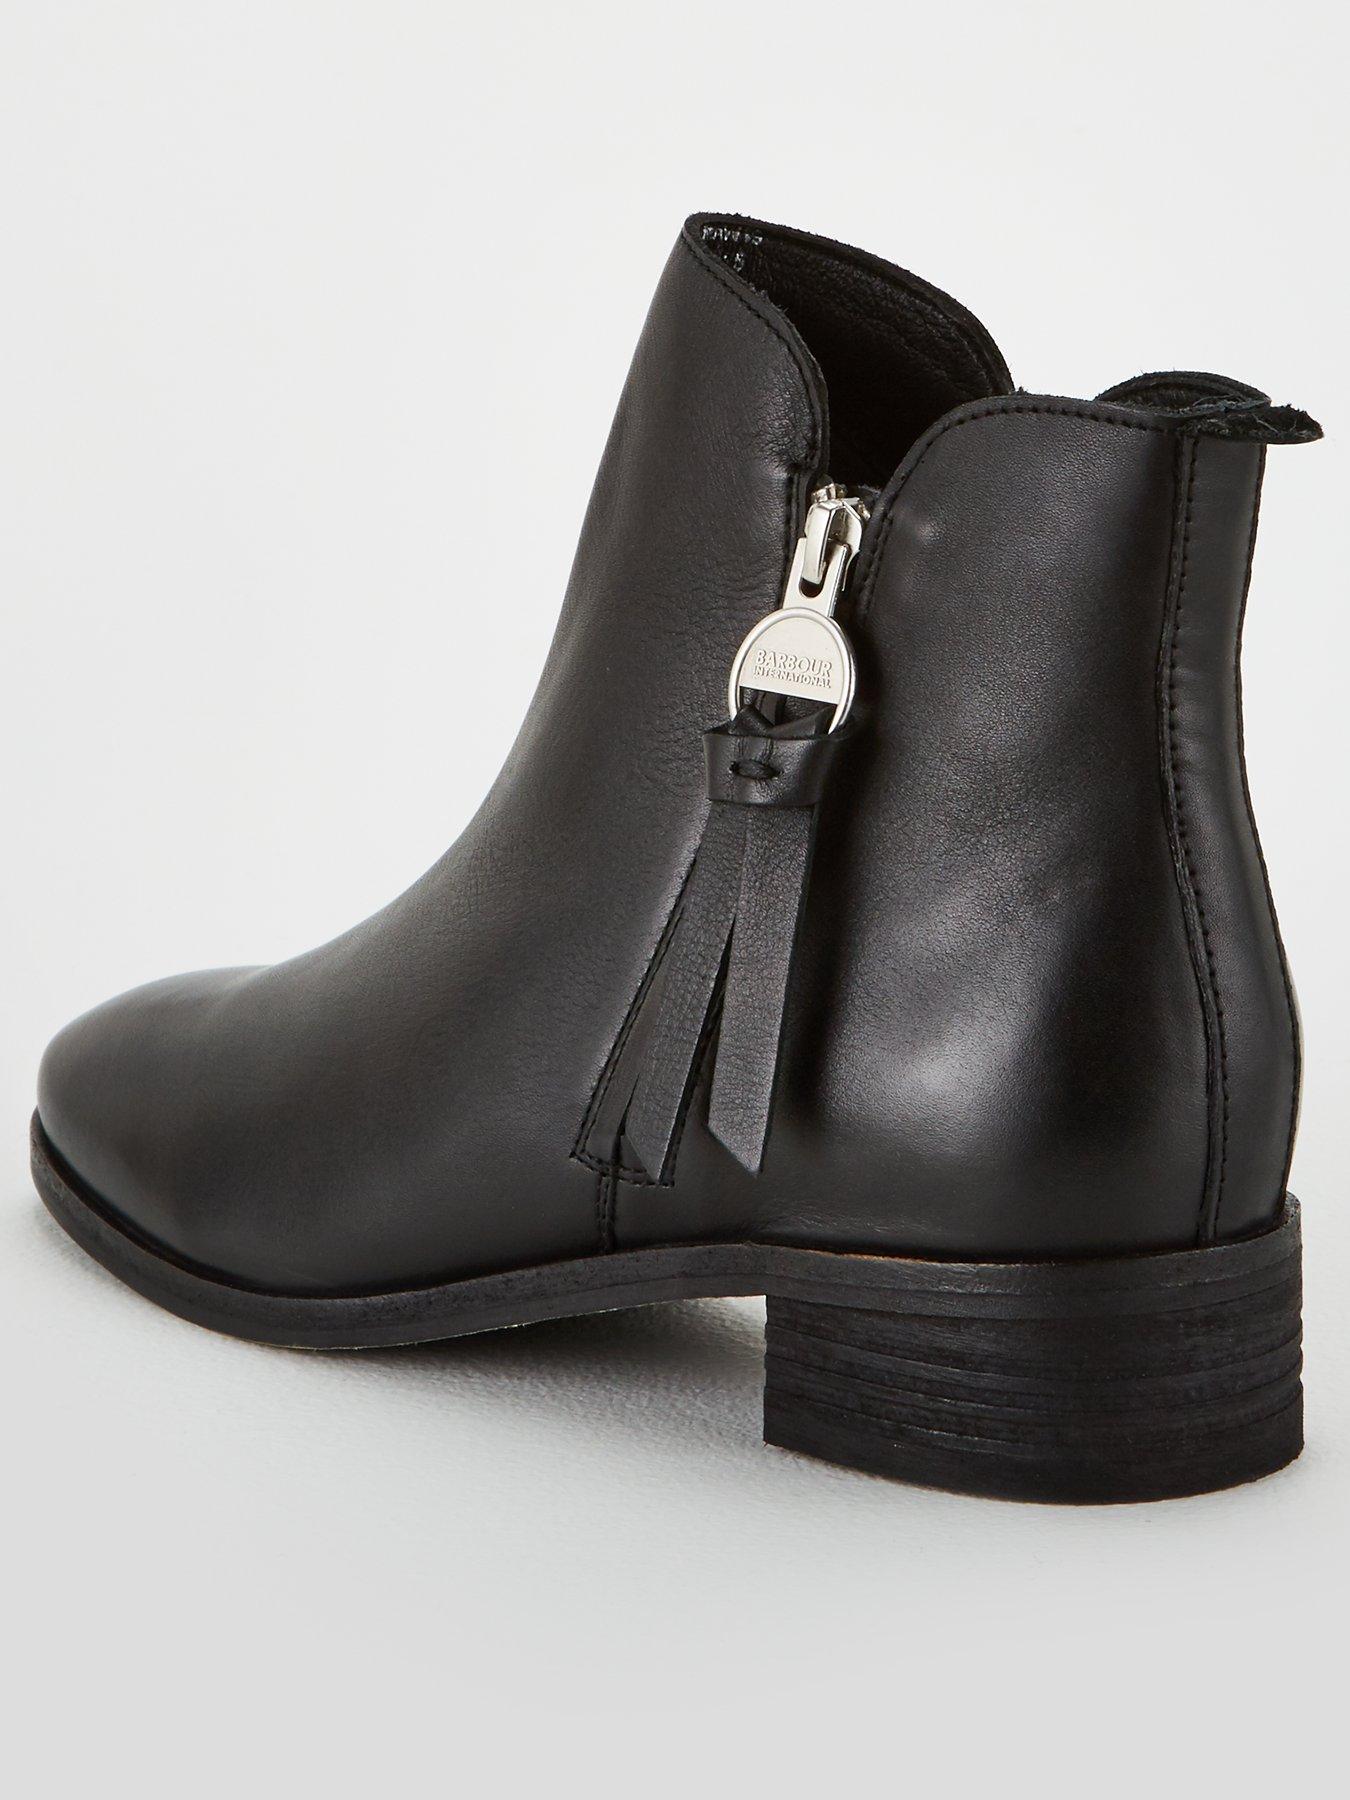 barbour penelope boots